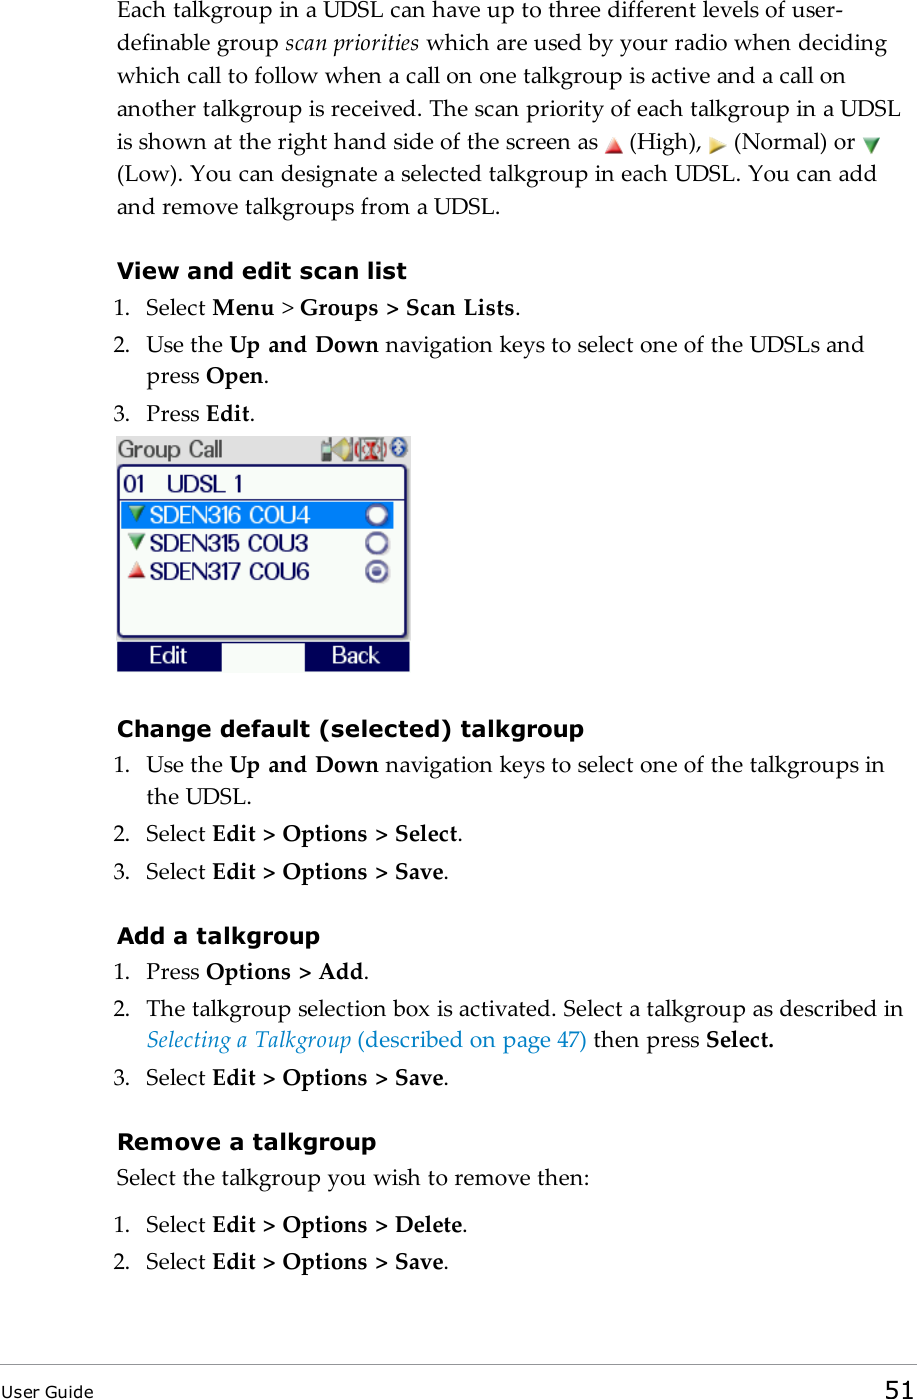 Each talkgroup in a UDSL can have up to three different levels of user-definable group scan priorities which are used by your radio when decidingwhich call to follow when a call on one talkgroup is active and a call onanother talkgroup is received. The scan priority of each talkgroup in a UDSLis shown at the right hand side of the screen as (High), (Normal) or(Low). You can designate a selected talkgroup in each UDSL. You can addand remove talkgroups from a UDSL.View and edit scan list1. Select Menu &gt;Groups &gt; Scan Lists.2. Use the Up and Down navigation keys to select one of the UDSLs andpress Open.3. Press Edit.Change default (selected) talkgroup1. Use the Up and Down navigation keys to select one of the talkgroups inthe UDSL.2. Select Edit &gt; Options &gt; Select.3. Select Edit &gt; Options &gt; Save.Add a talkgroup1. Press Options &gt; Add.2. The talkgroup selection box is activated. Select a talkgroup as described inSelecting a Talkgroup (described on page47) then press Select.3. Select Edit &gt; Options &gt; Save.Remove a talkgroupSelect the talkgroup you wish to remove then:1. Select Edit &gt; Options &gt; Delete.2. Select Edit &gt; Options &gt; Save.User Guide 51